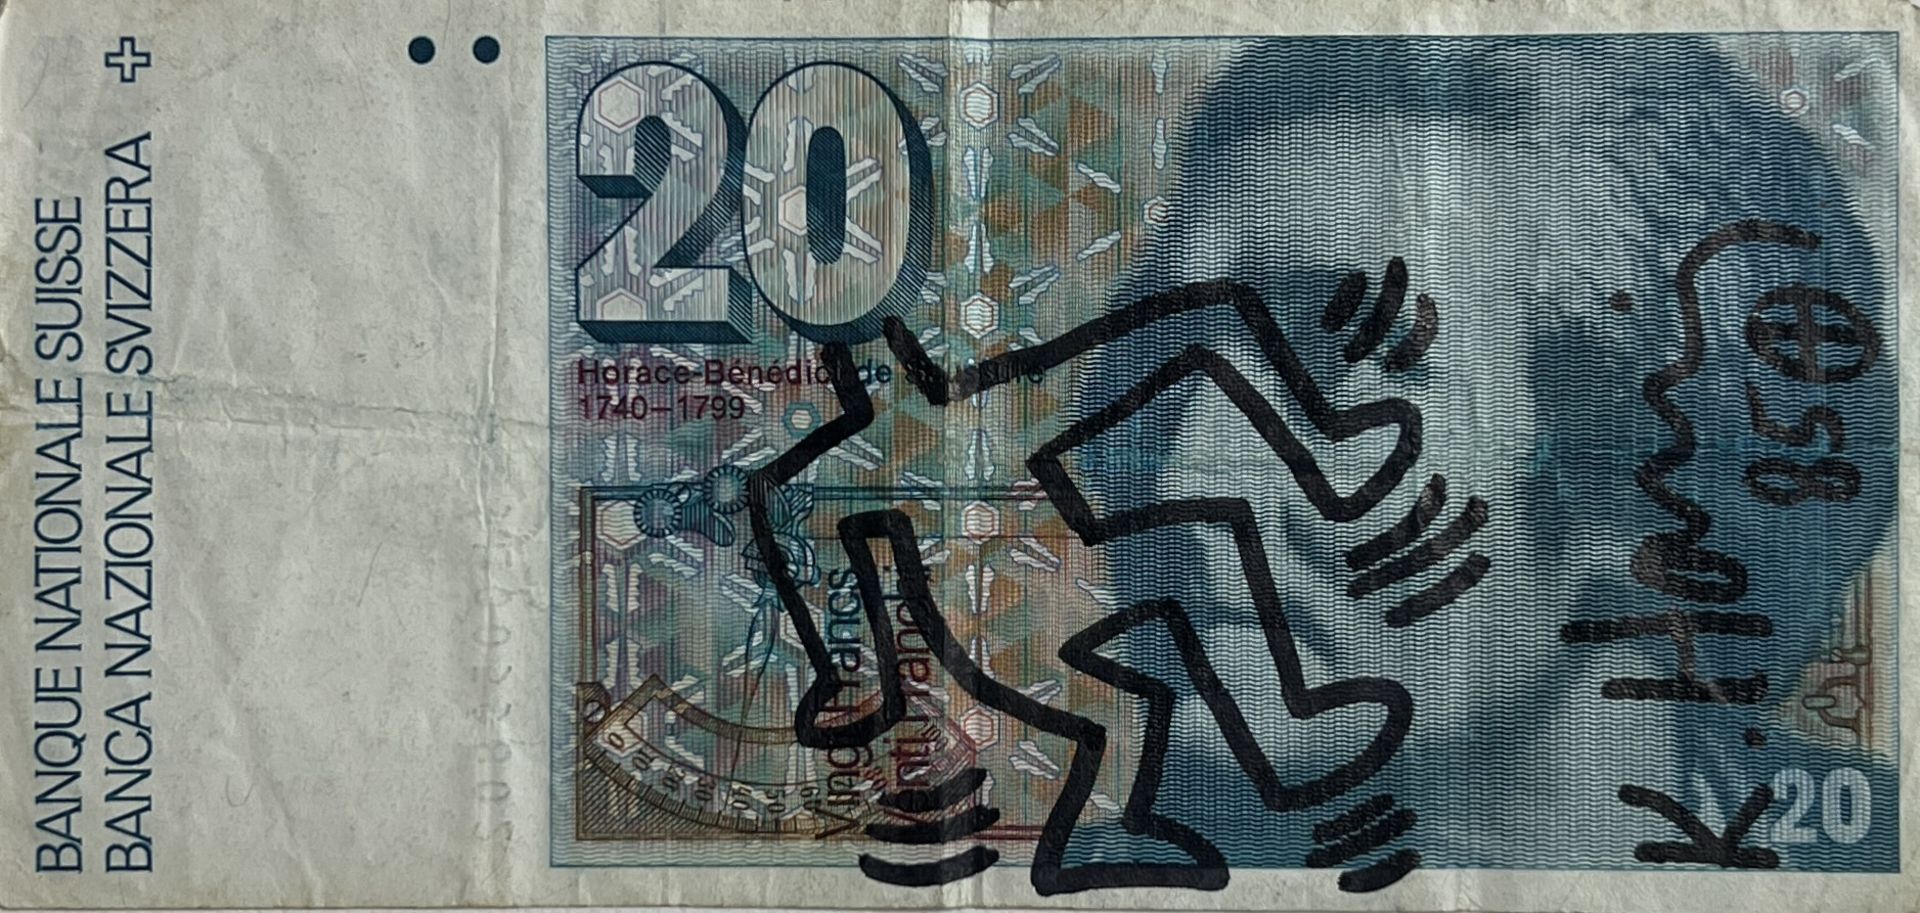 Keith Haring. Banknote of 20 Francs from the Swiss National Bank enhanced with an original drawing i